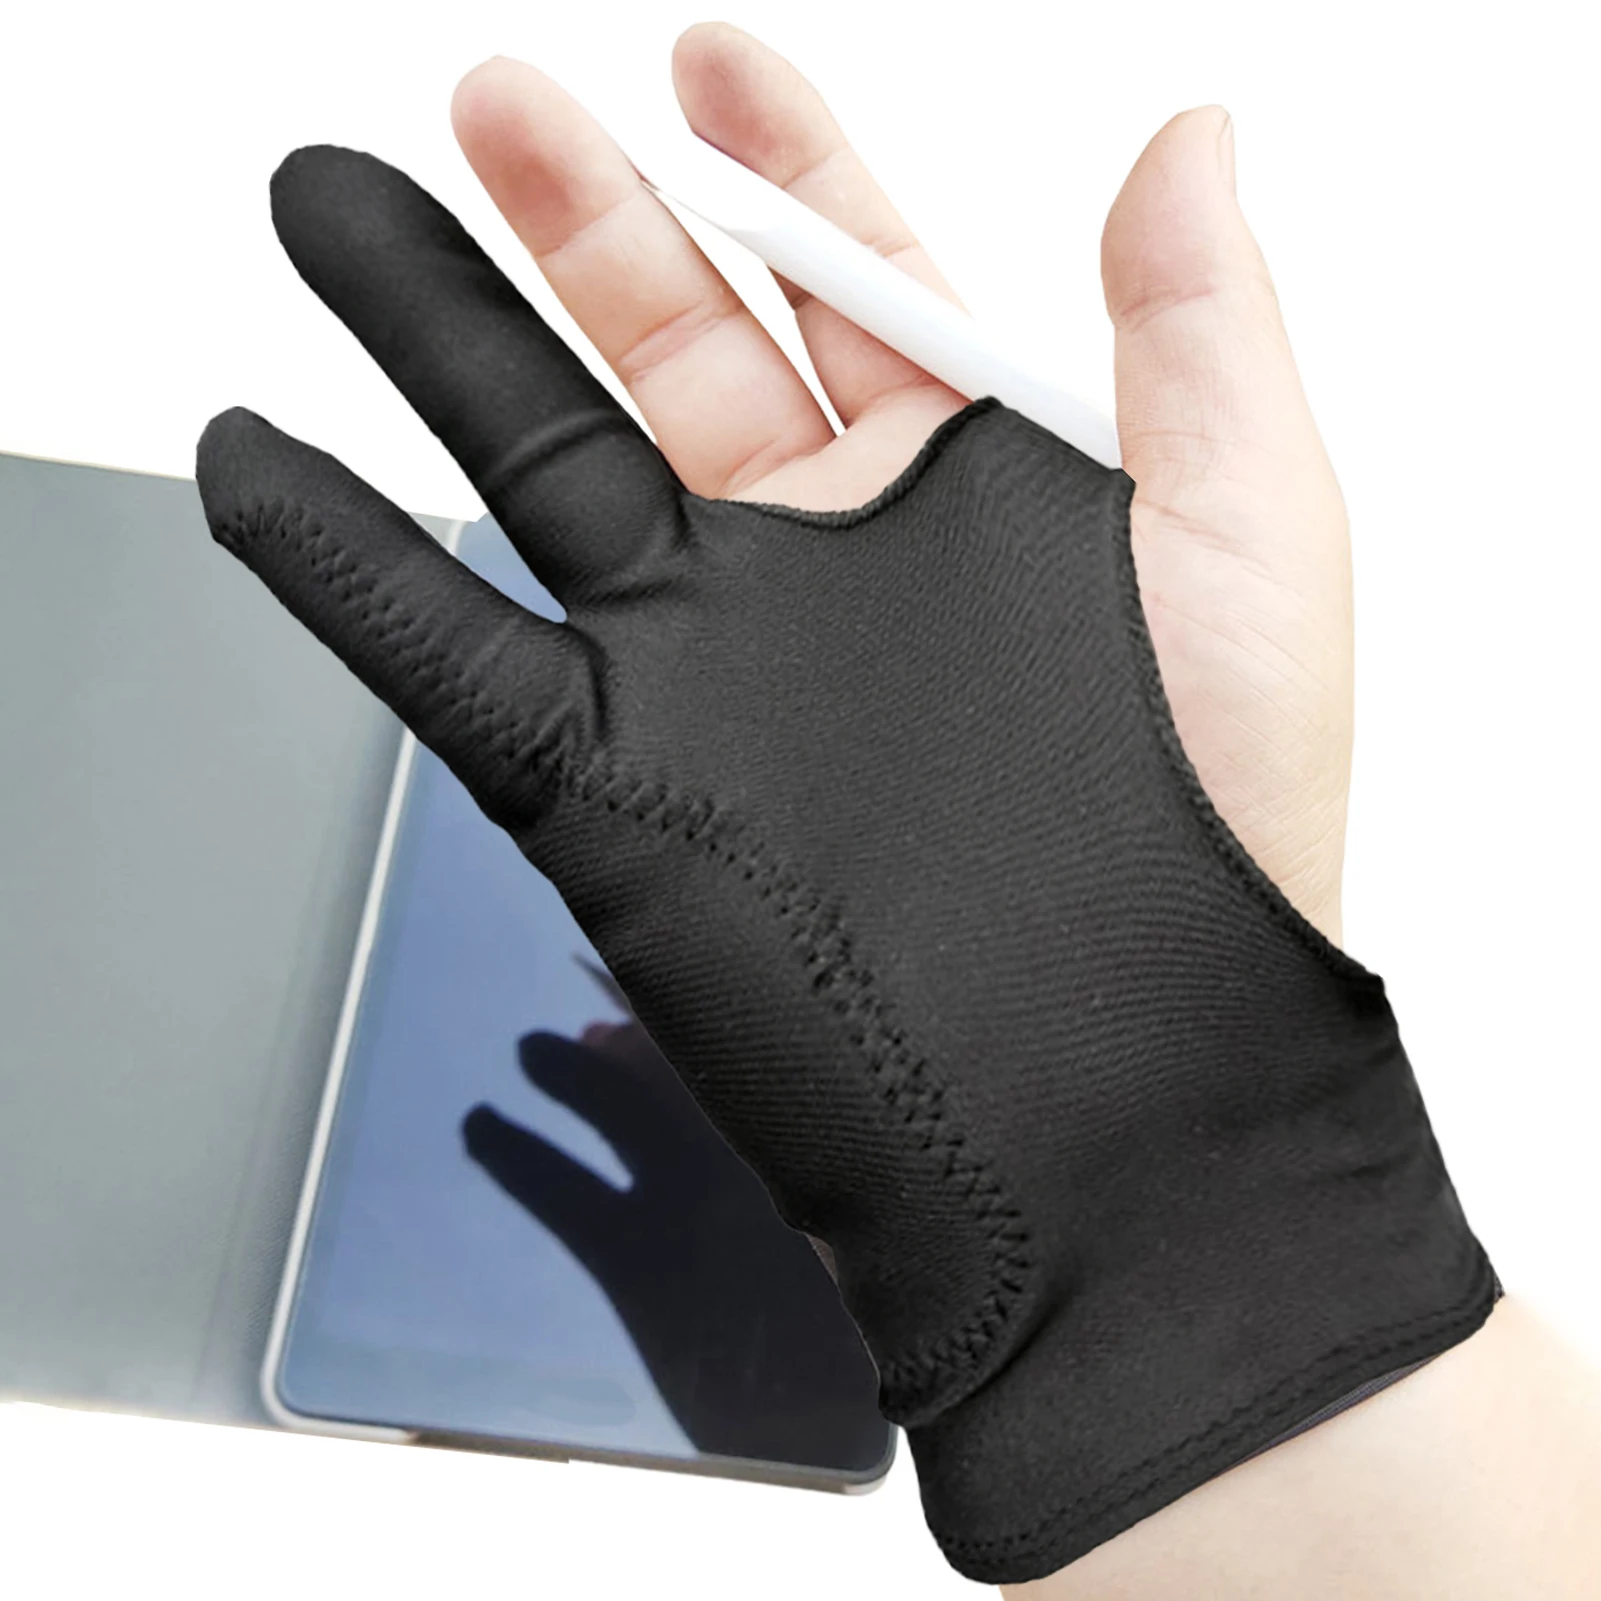 

Anti-touch Glove Artist Gloves For Drawing Tablet Artist Gloves With Two Fingers For Tablet Paper Sketching Smudge Guard